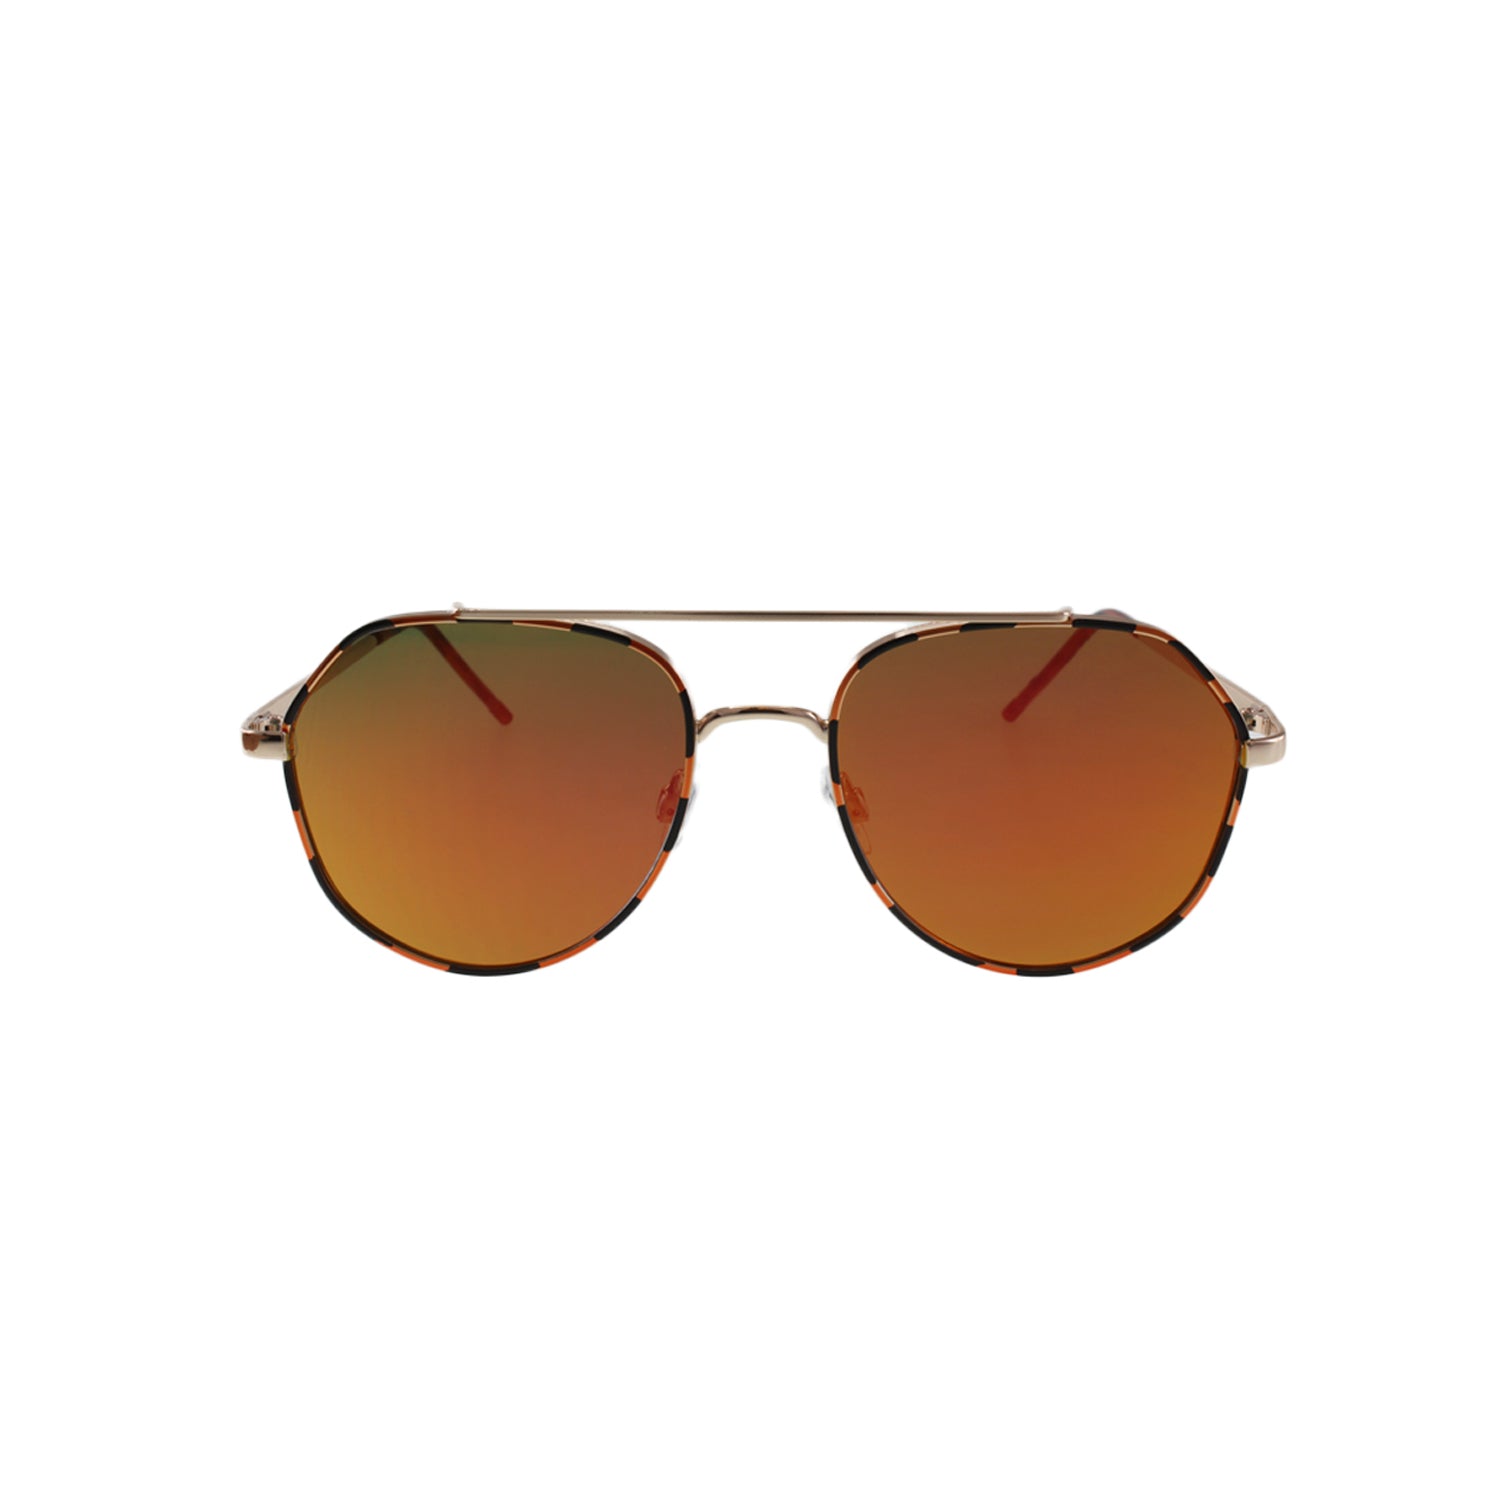 Biltmore Sunglasses in Red - Shop Luxurious57